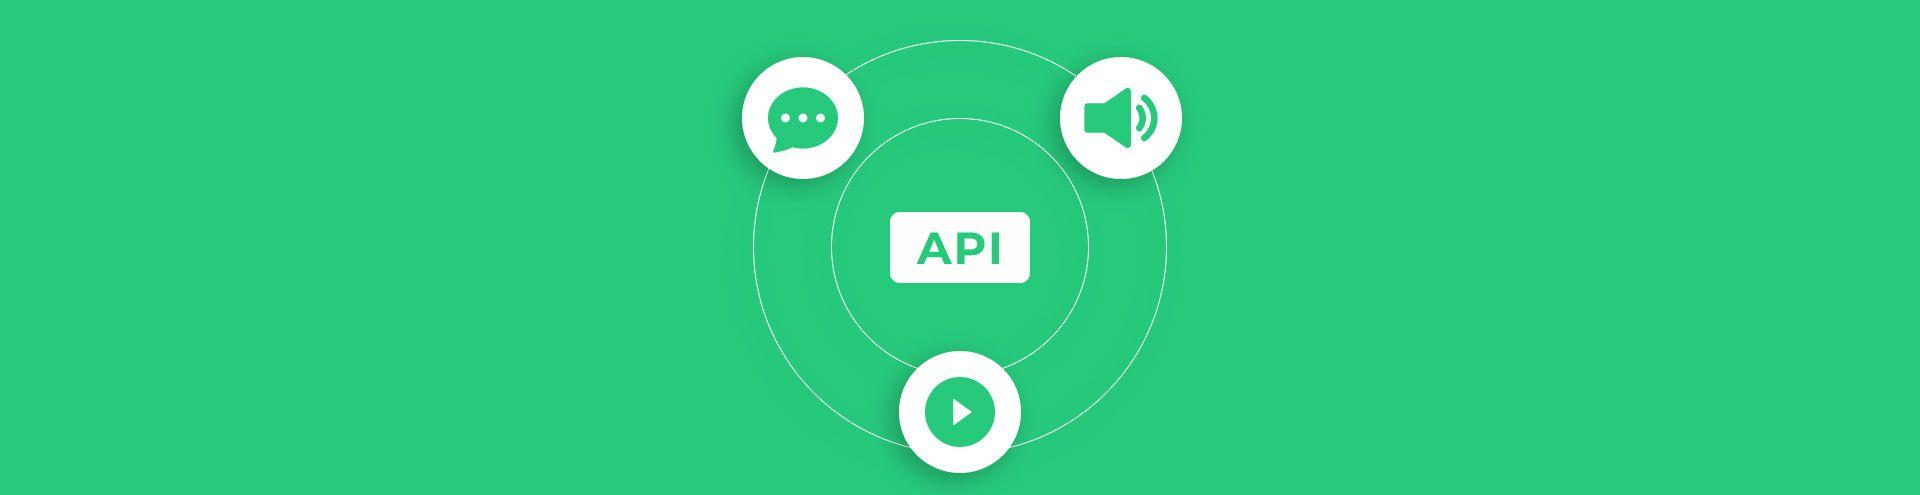 6 Best Chat, Voice, and Video APIs to Be Considered for Your Web or Mobile App Development